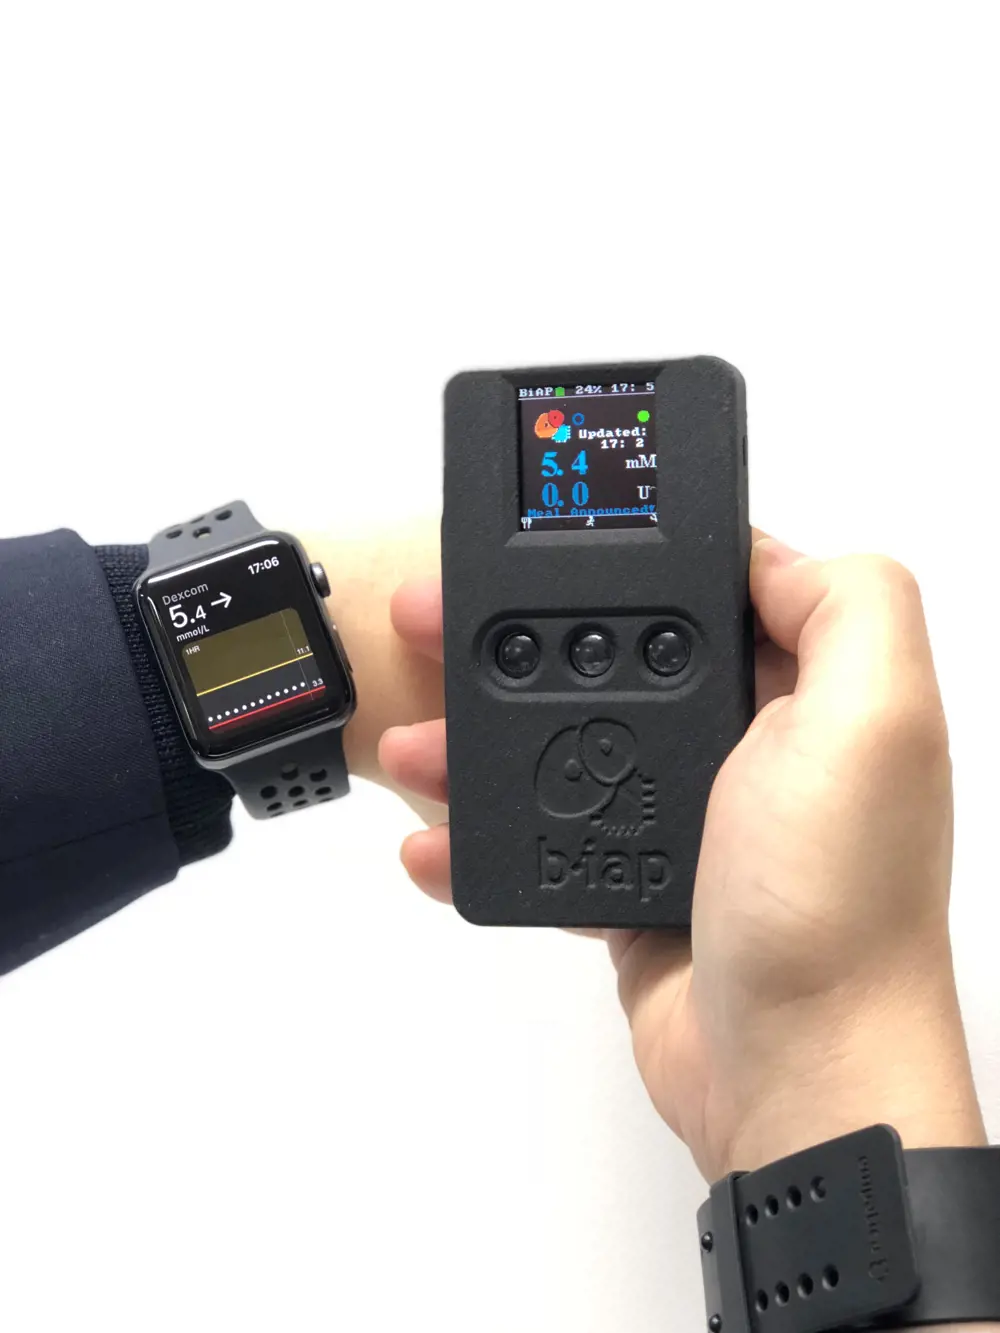 A smartwatch device wrapped around someone's wrist with a screen that is linked to a handheld device that is linked to a blood glucose controller device. 